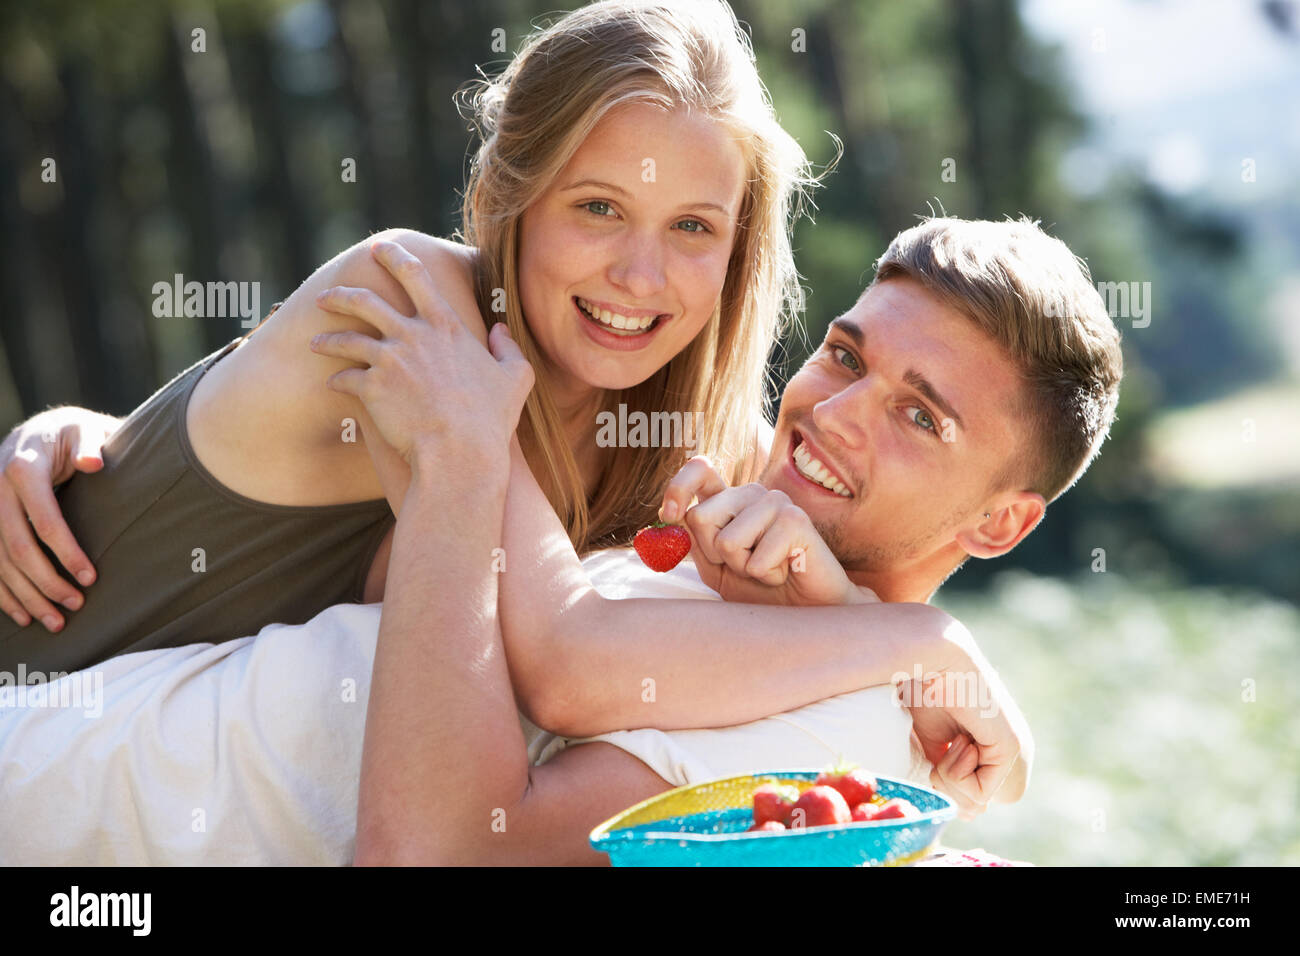 Young Couple Enjoying Picnic In Countryside Stock Photo